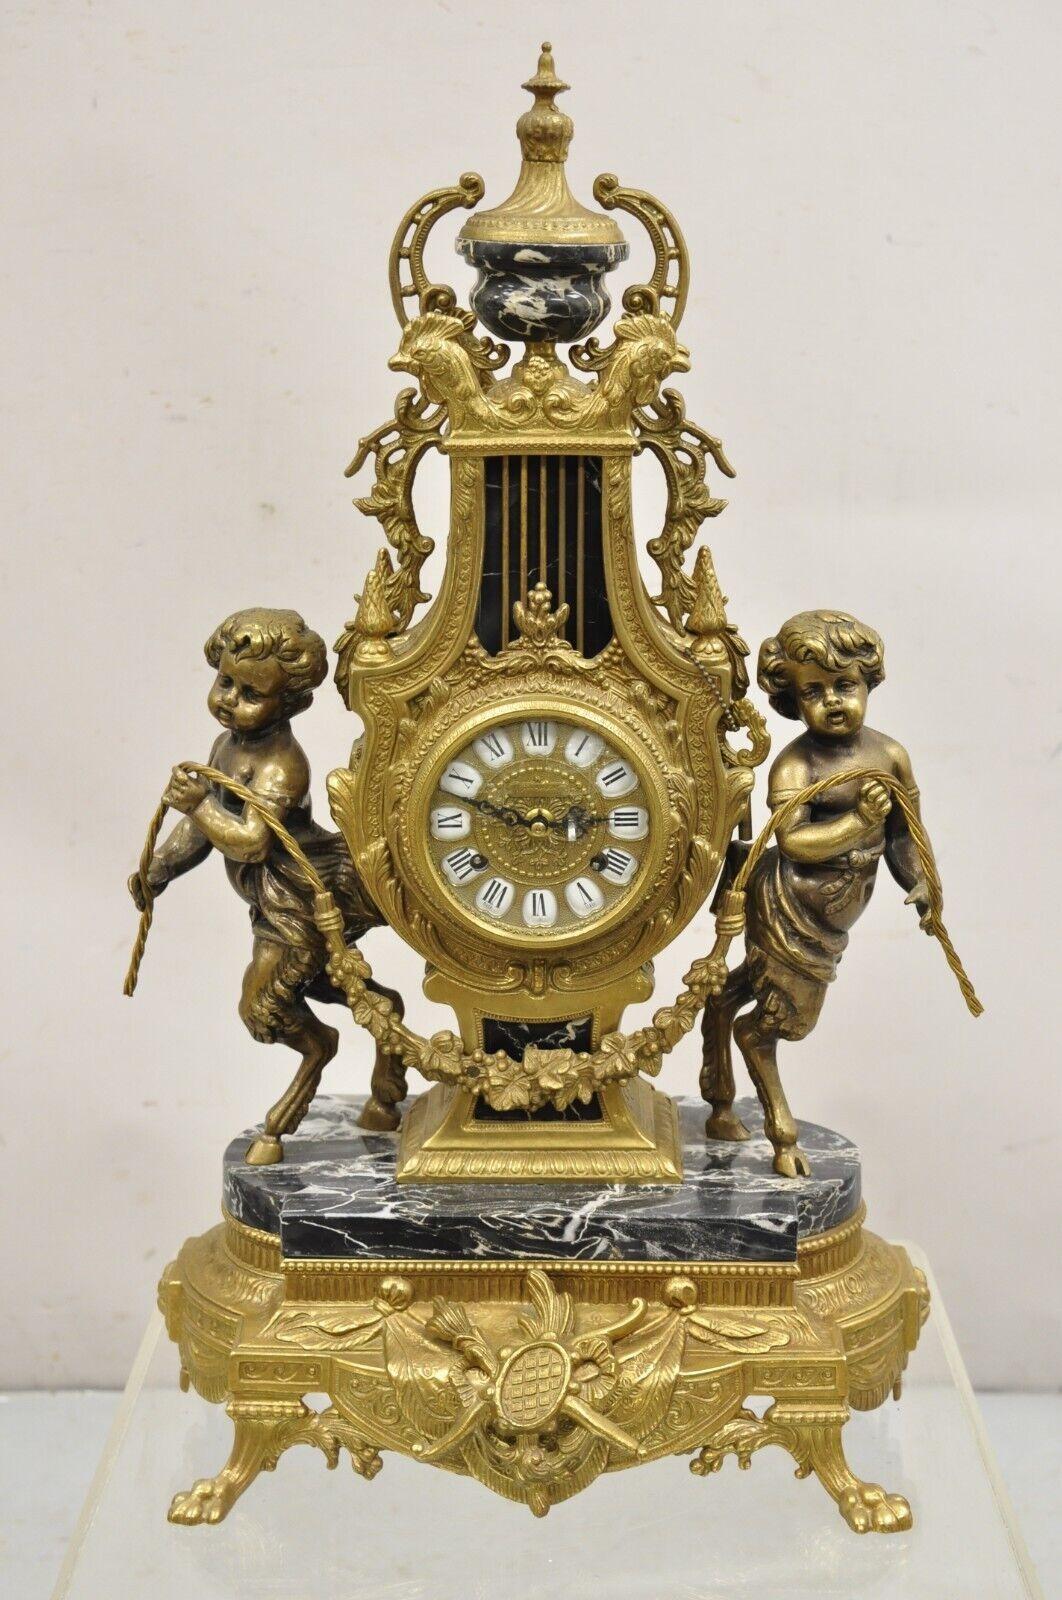 Vintage French Louis XV Style Brevetatto Italy Brass & Marble Figural Clock Set - 3 Pc Set. Item features an ornate figural clock with hoof foot cherubs and black marble accents, 2 ornate candelabras with 7 candle holders and cherub heads. German